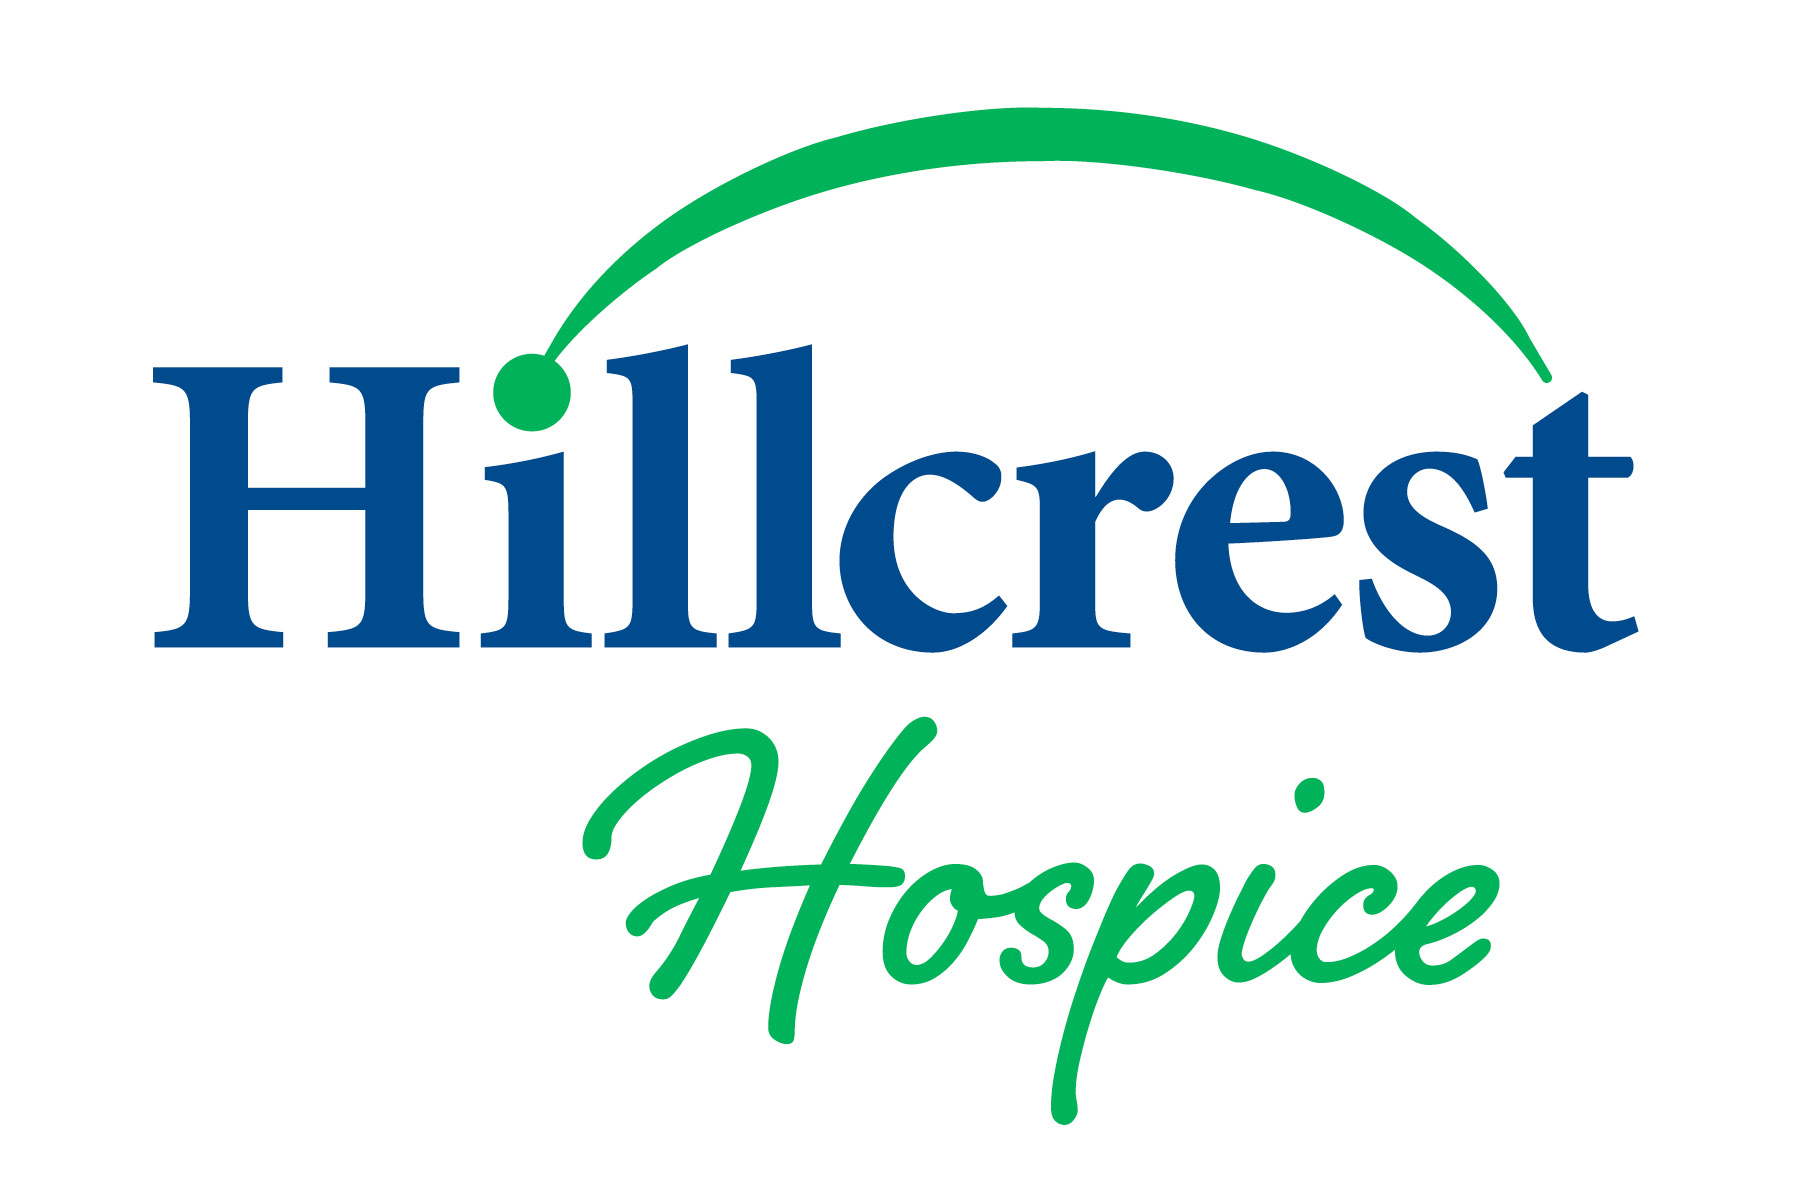 Hillcrest Hospice